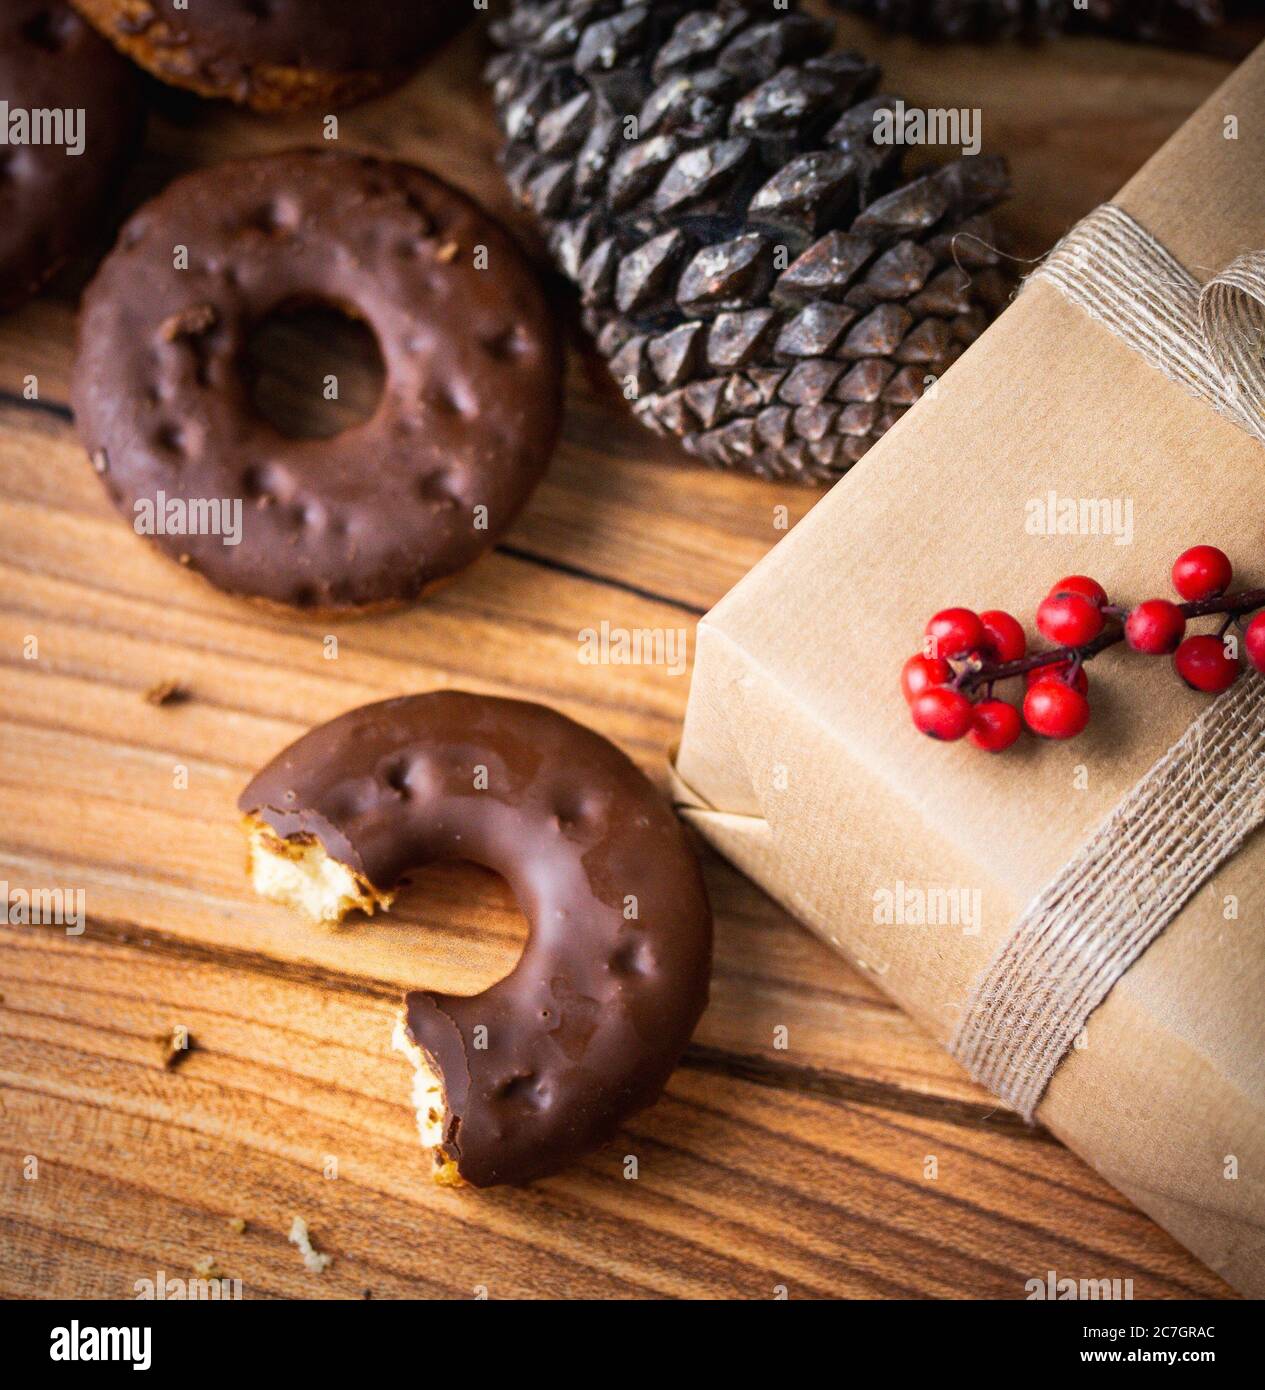 High angle closeup shot of a half-eaten chocolate doughnut next to a wrapped gift and a pine cone Stock Photo